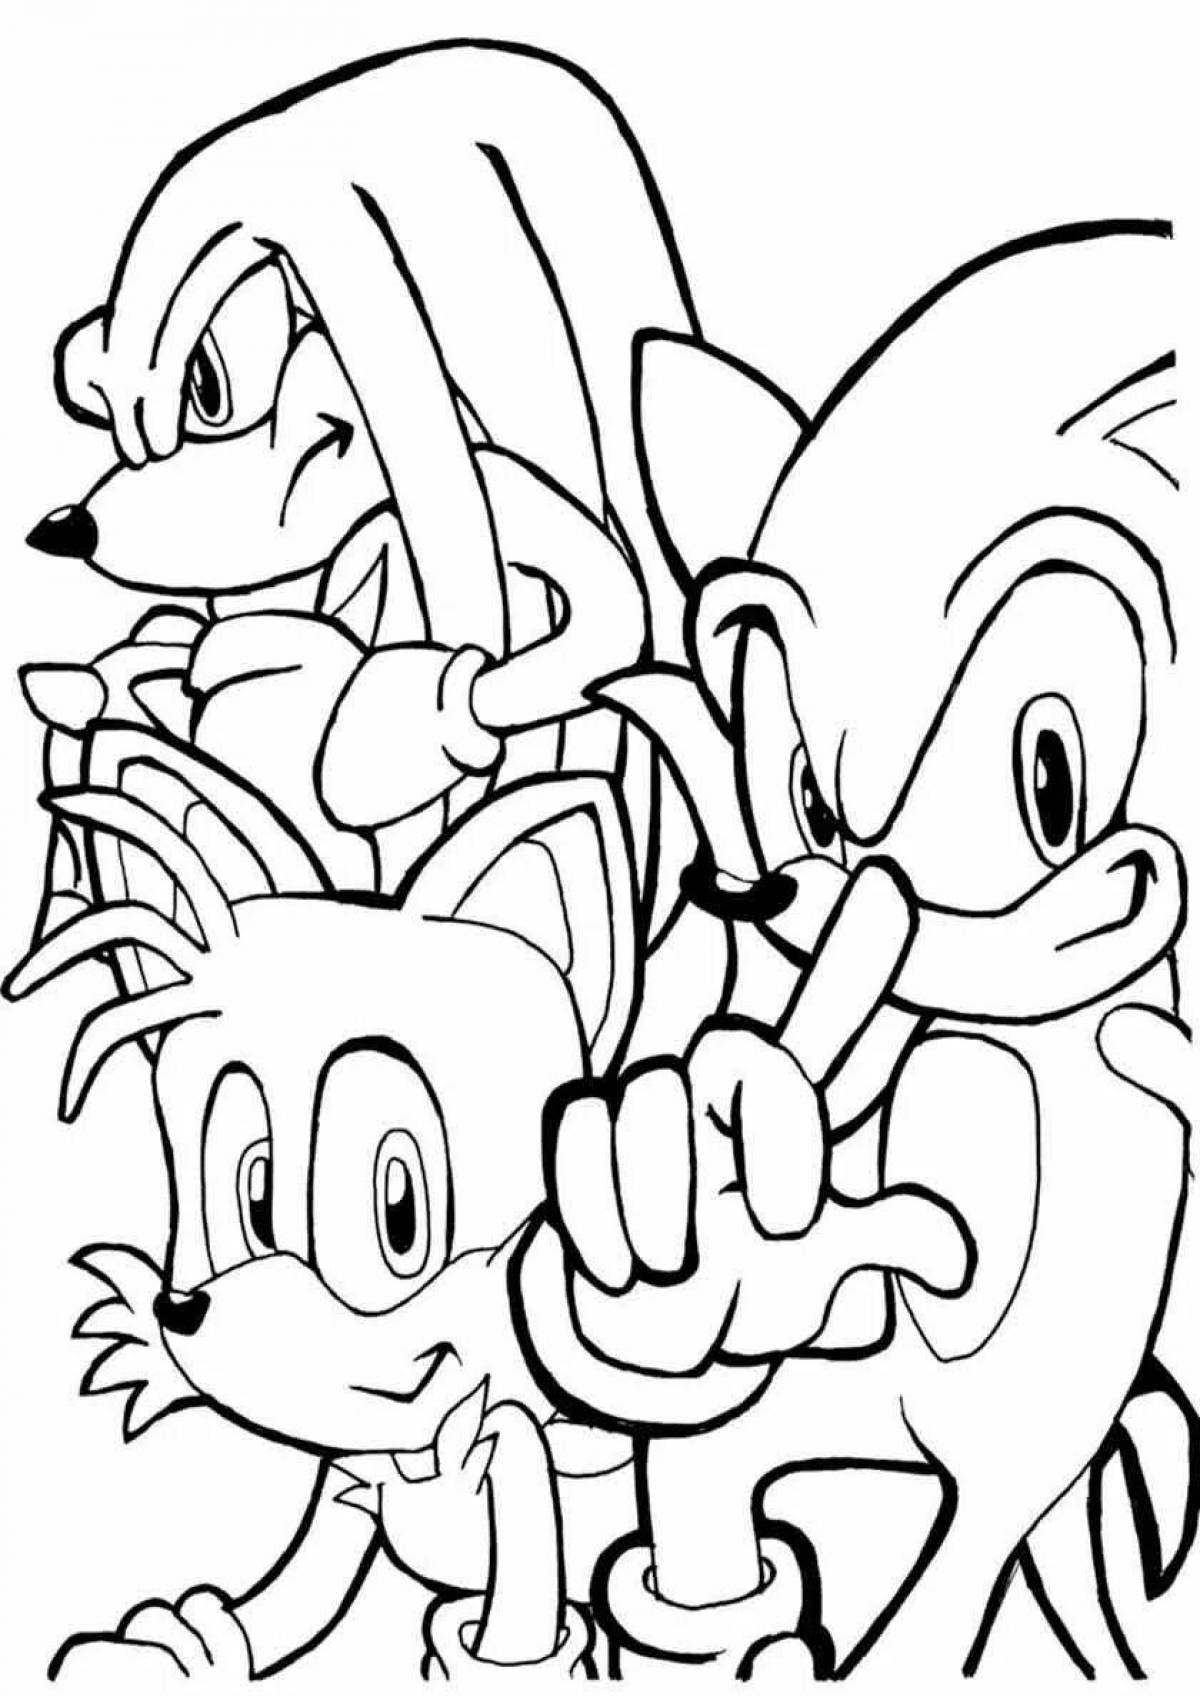 Playful coloring sonic the hedgehog